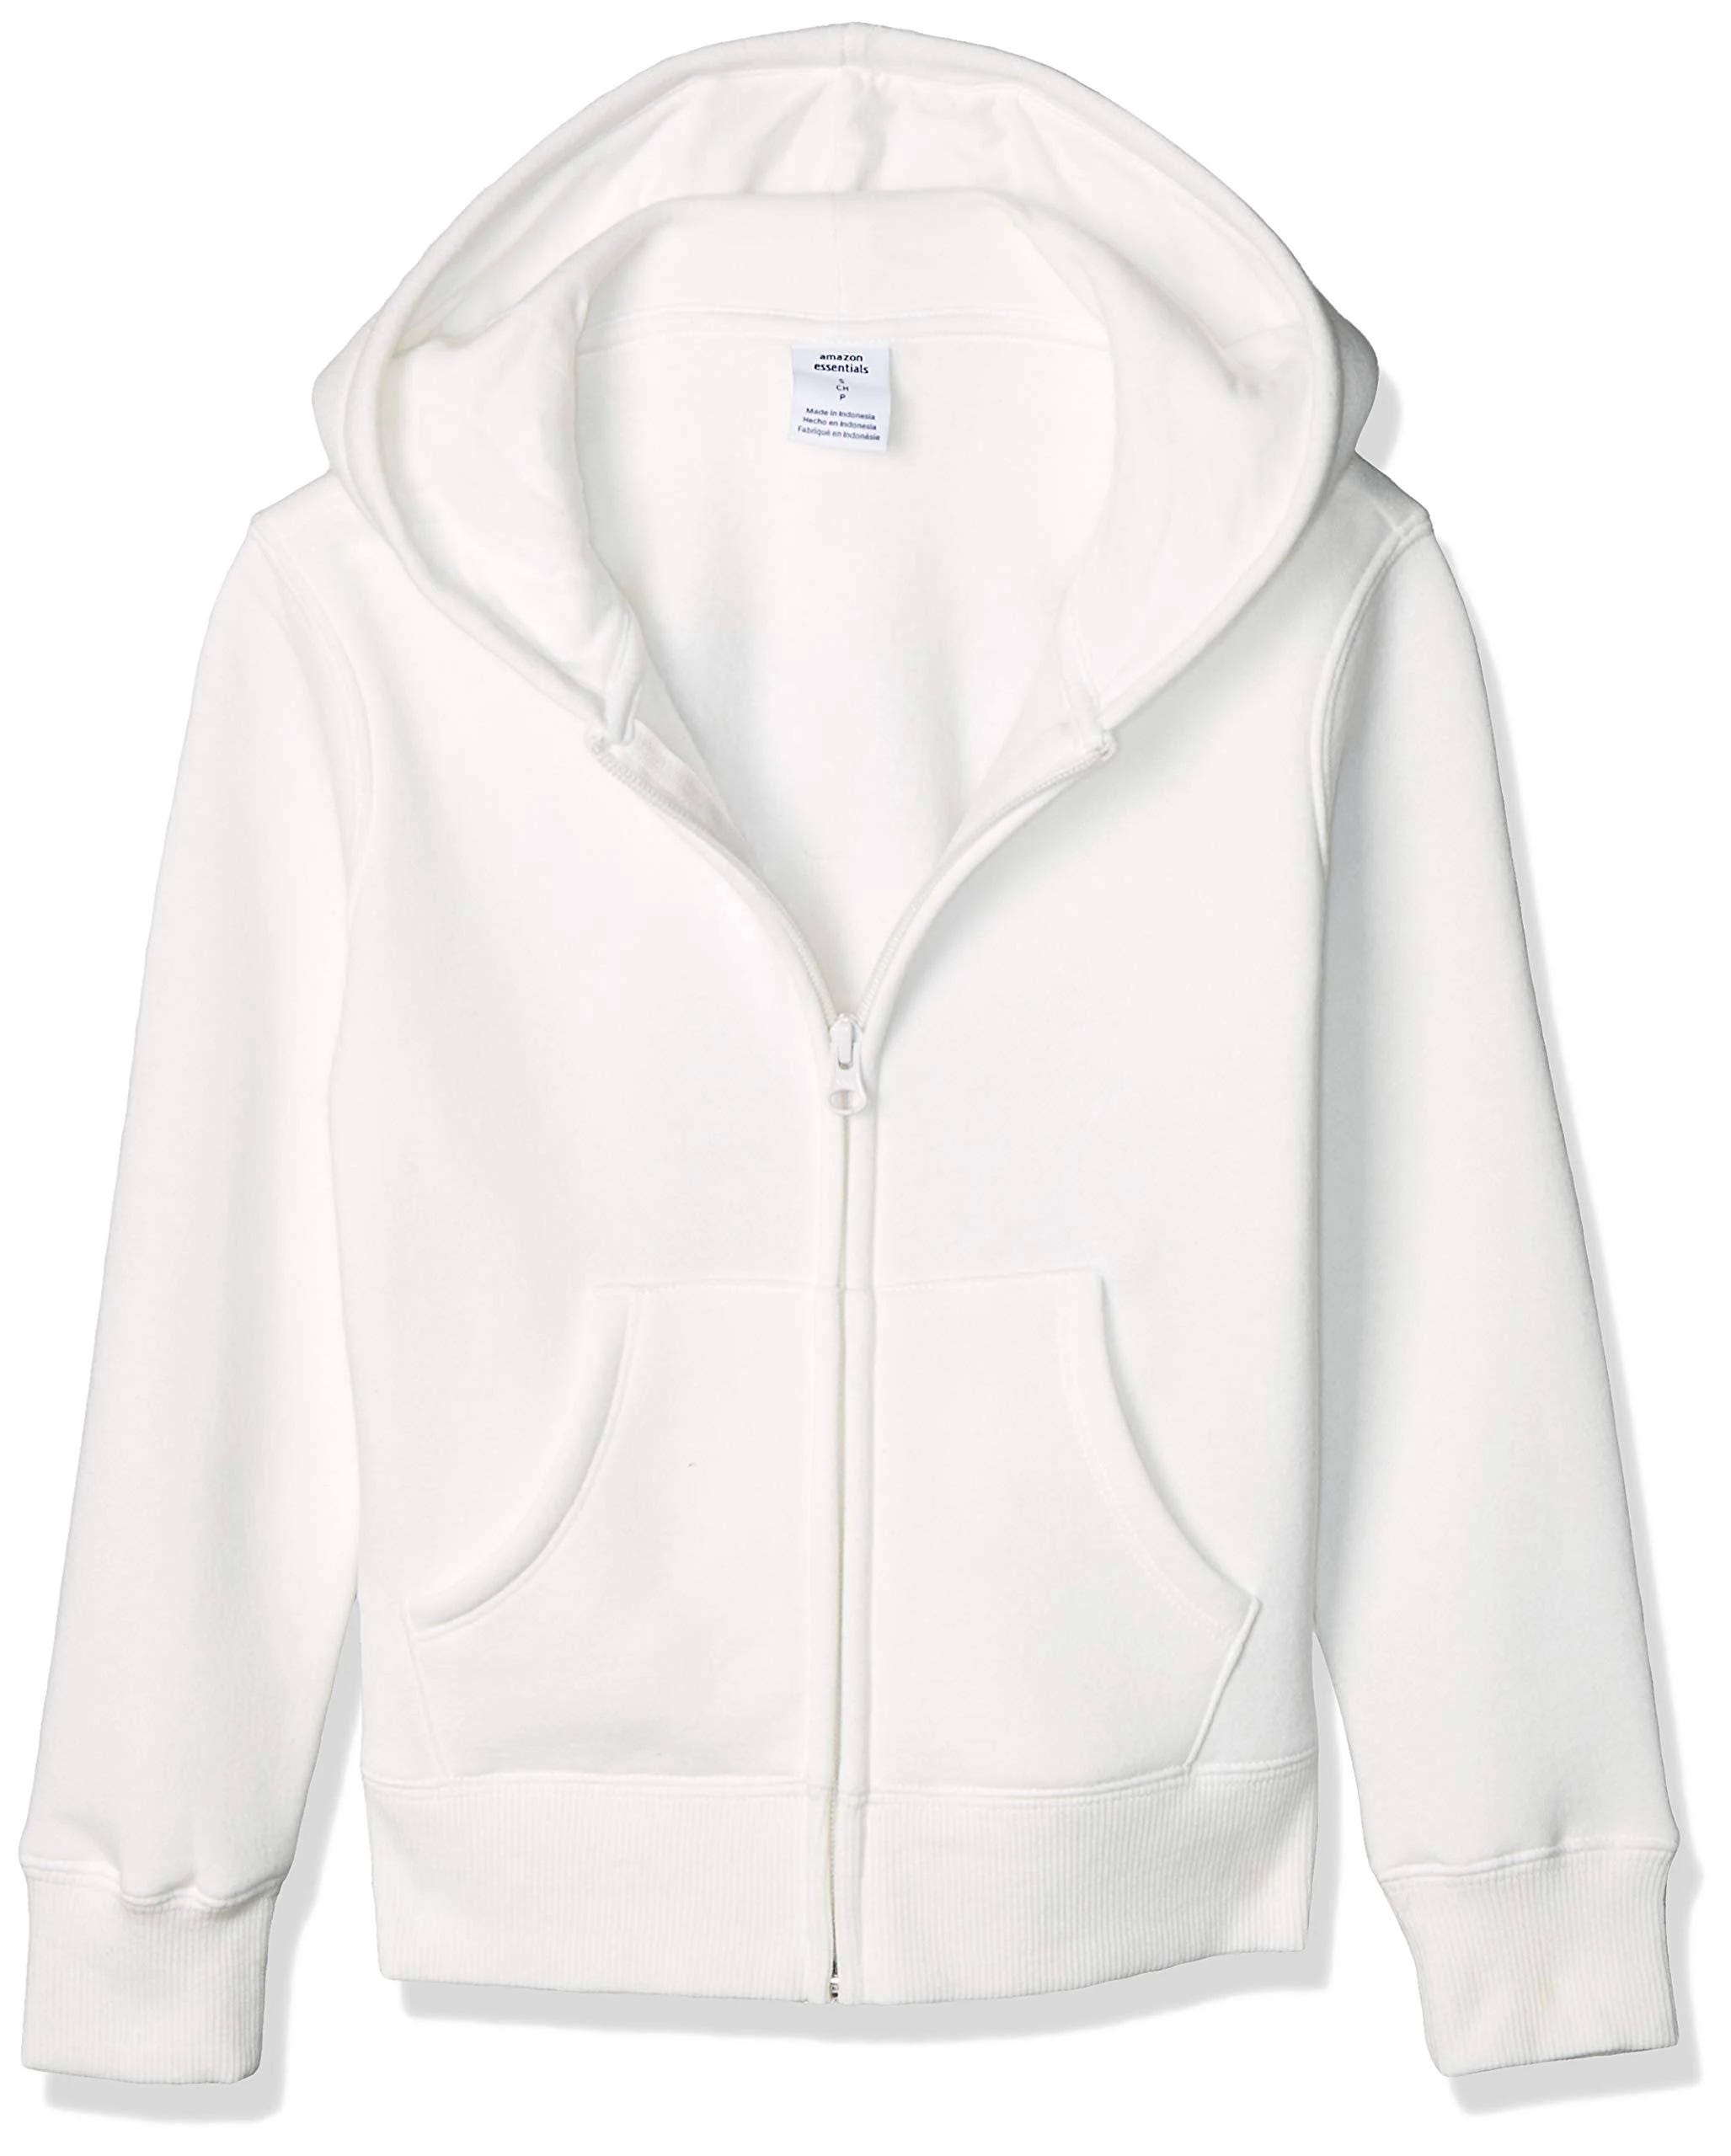 Relaxed White Fleece Hoodie by Amazon Essentials | Image